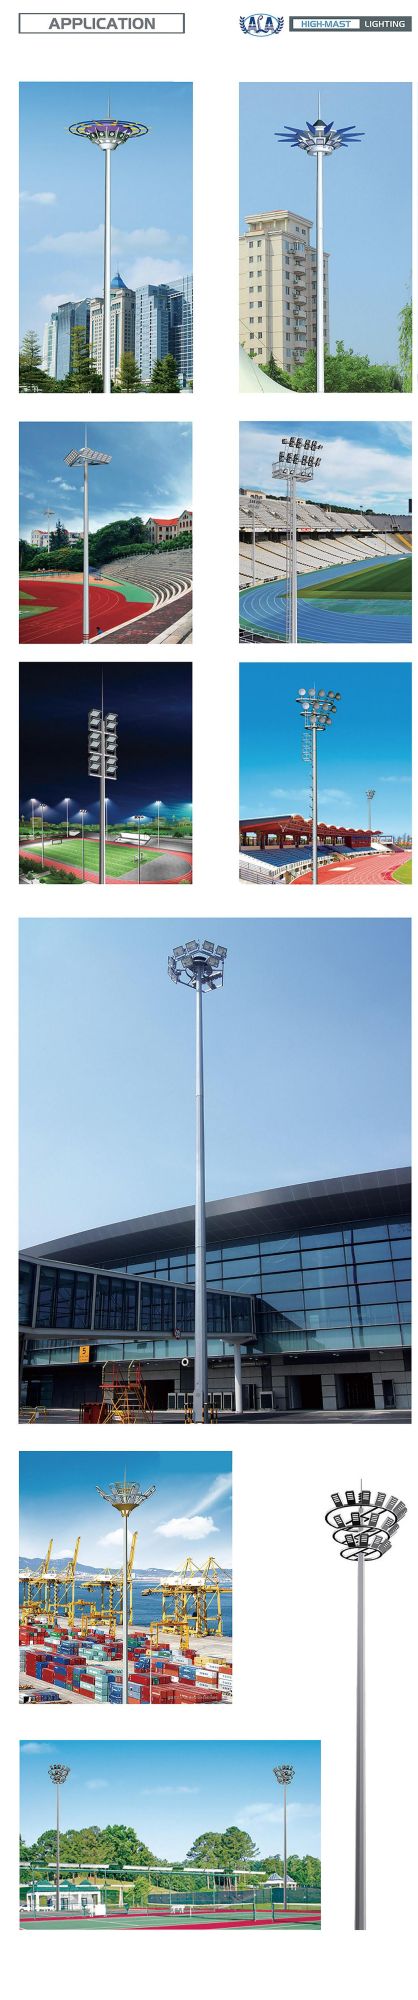 Ala Hot Sale Steel Round 600W High Mast Light with Pole Light for Outdoor Lighting 15m 20m 25m 30m